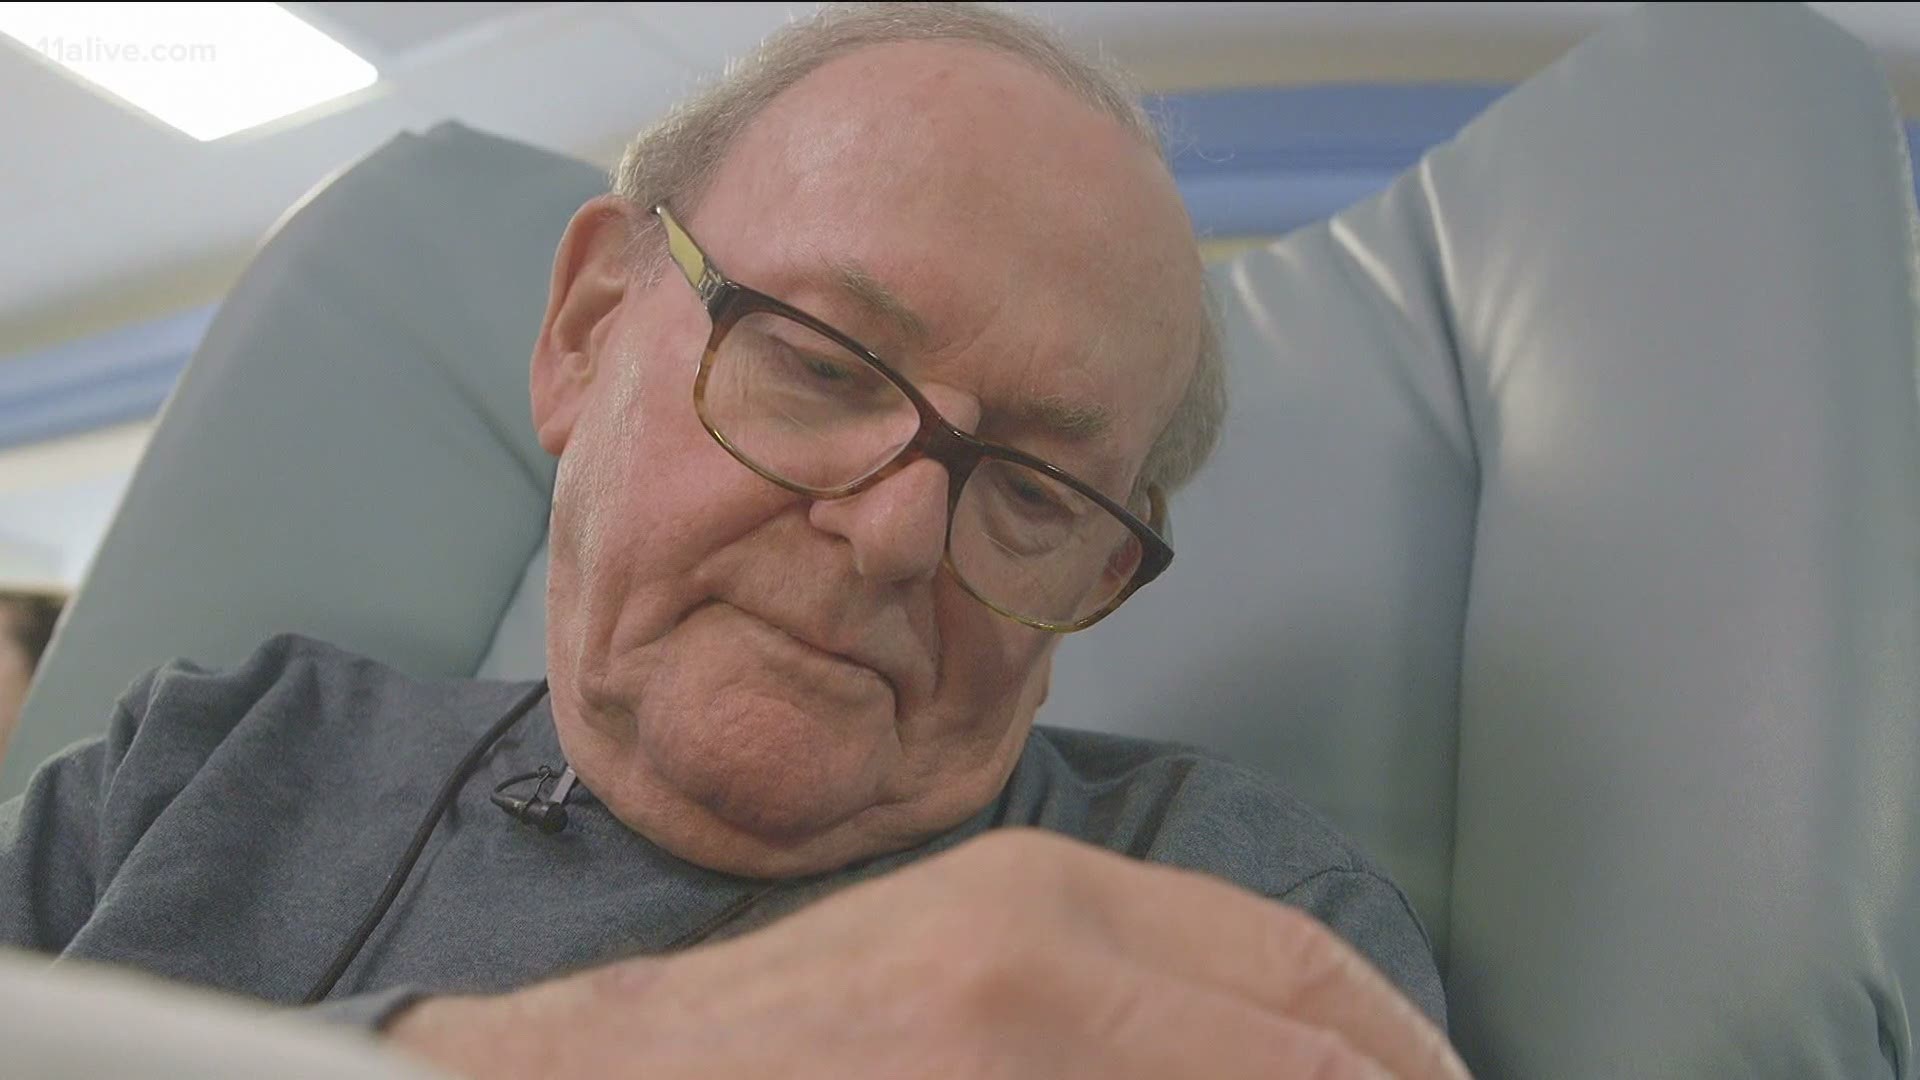 The "ICU Grandpa" became an instant star in 2017 when his story was shared around the world.